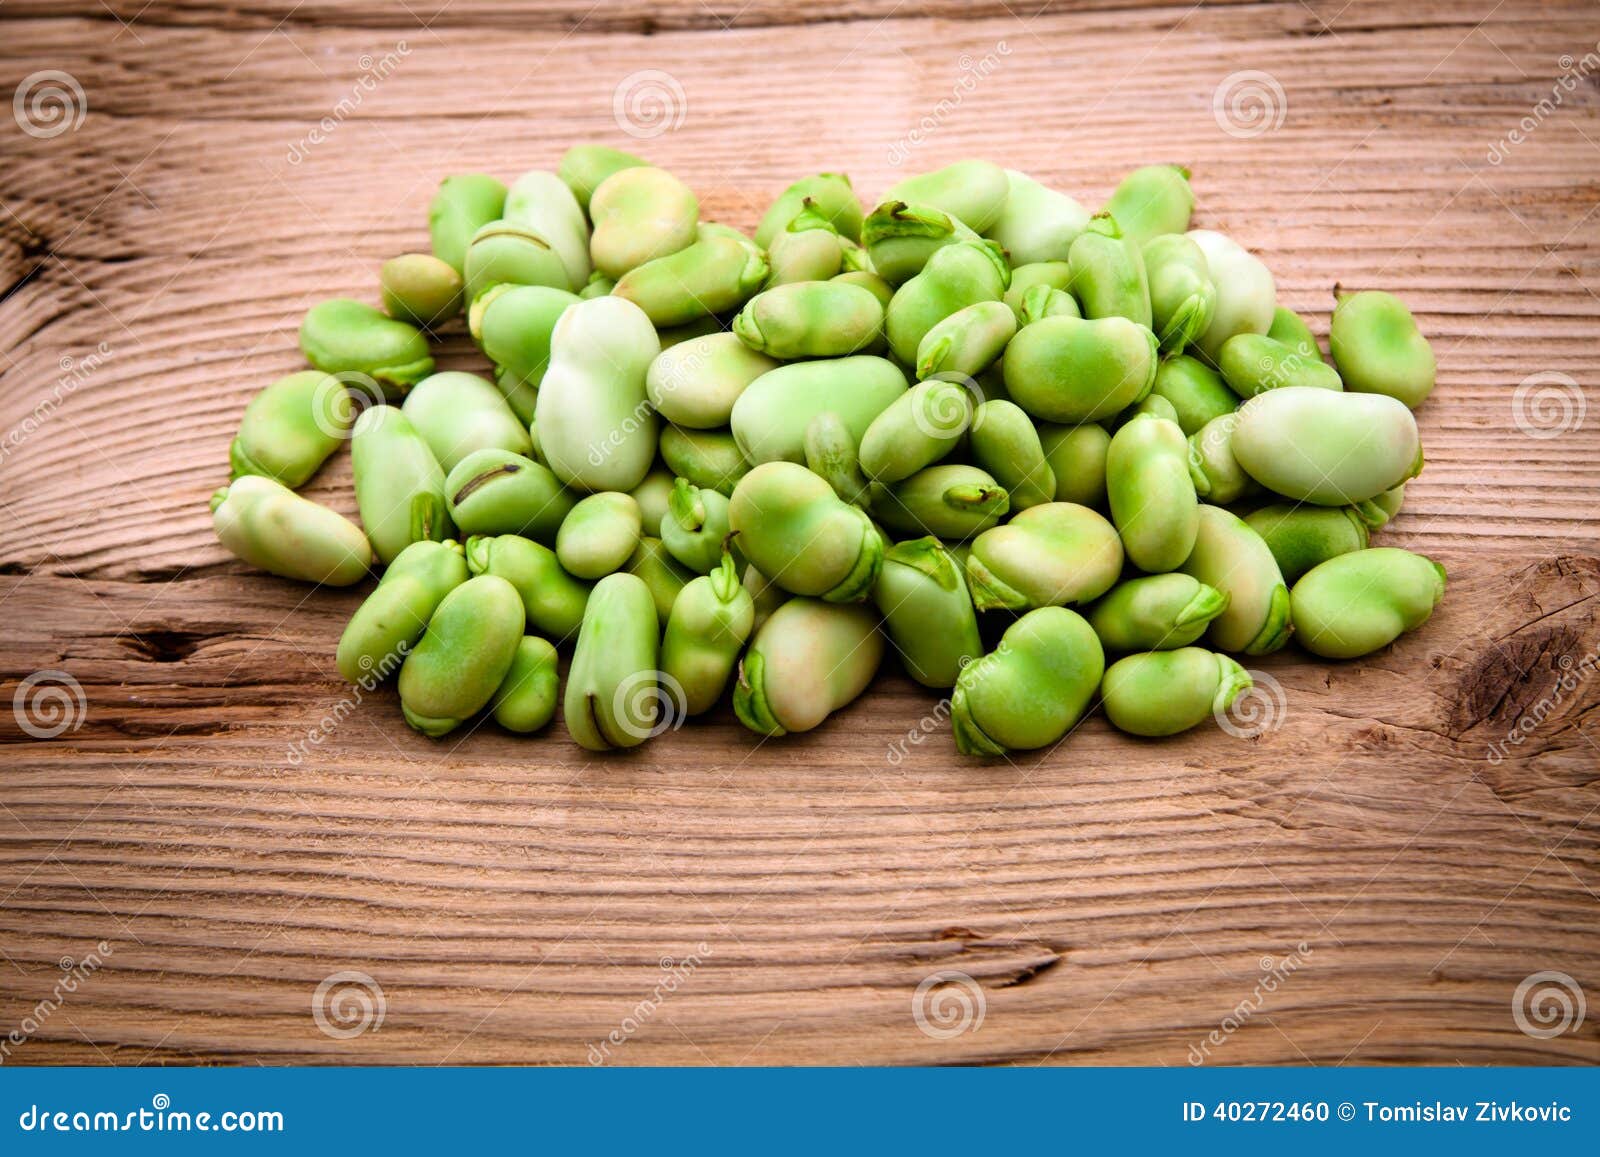 fresh broad bean on old wooden